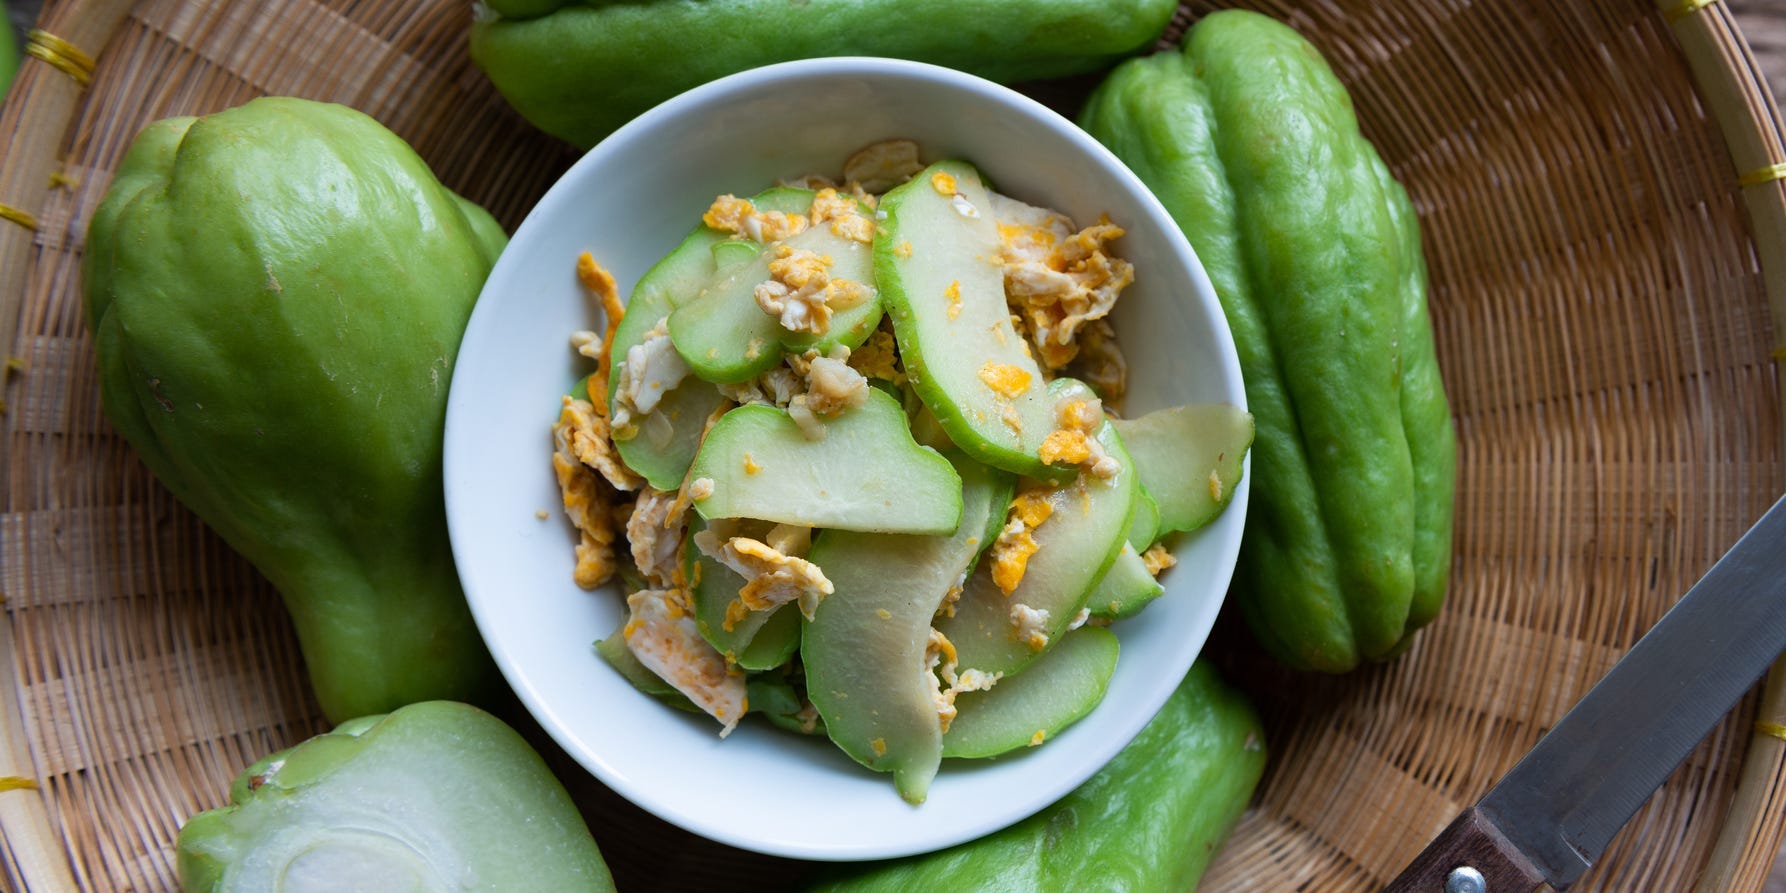 Whole and halved chayote squash surrounding a bowl of cut up and sauteed chayote